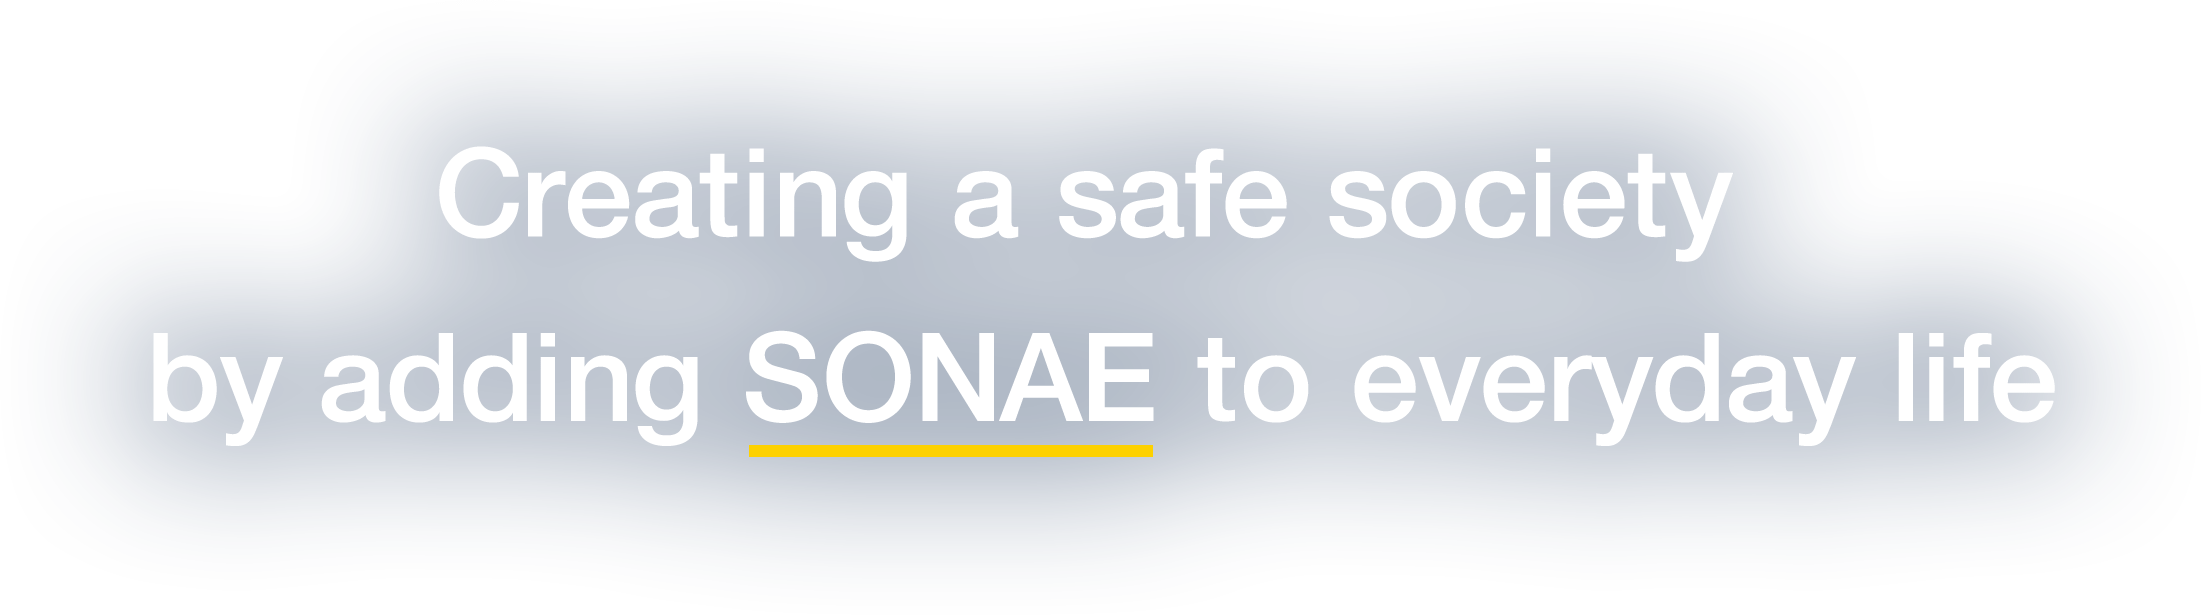 Creating a safe society by adding SONAE to everyday life